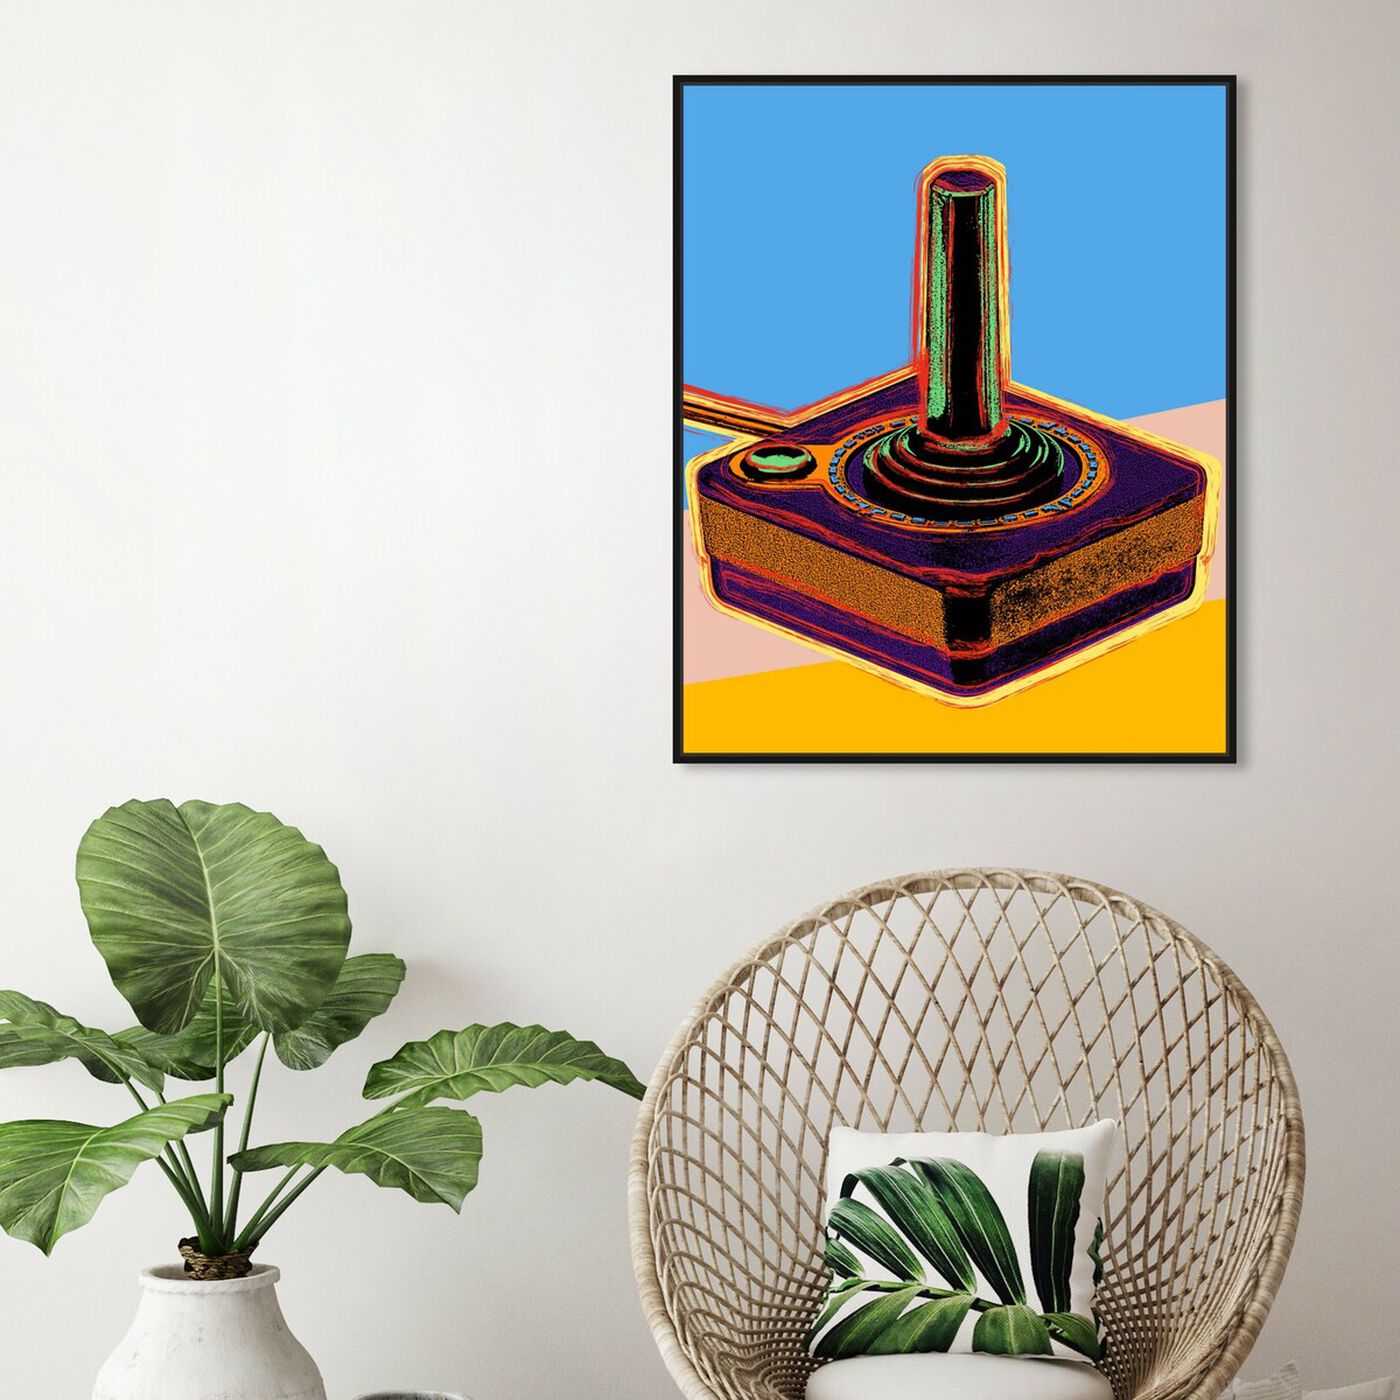 Hanging view of Warhol style Joystick featuring entertainment and hobbies and video games art.